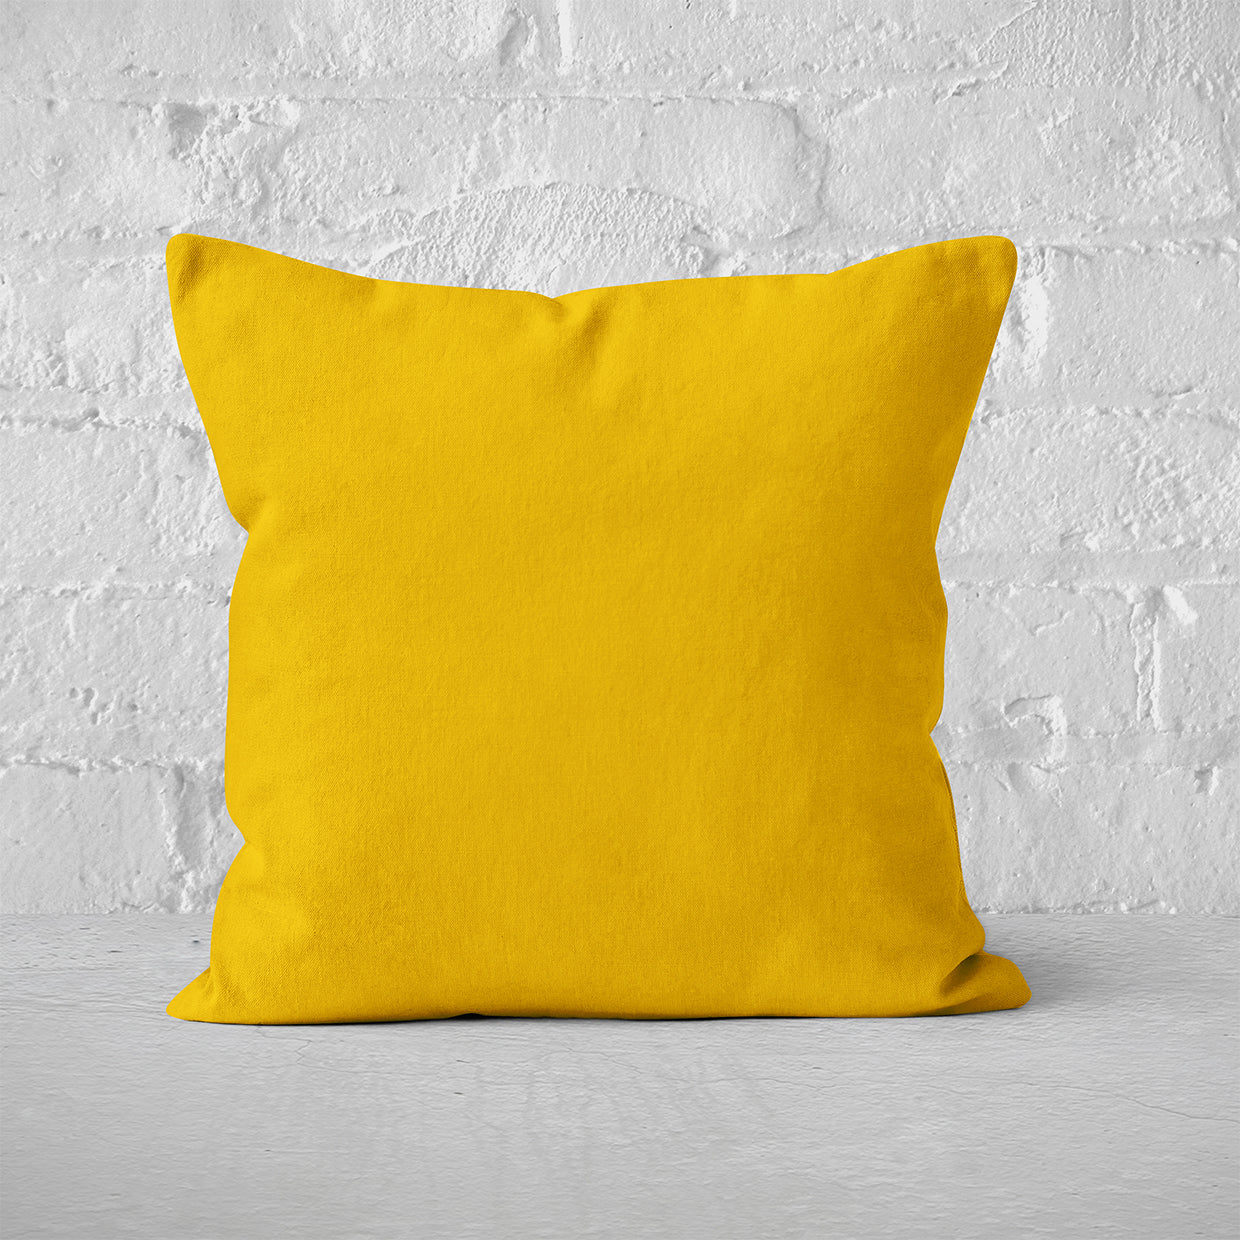 Pillow Cover Art Feature 'Solid' - Mustard Yellow - Cotton Twill